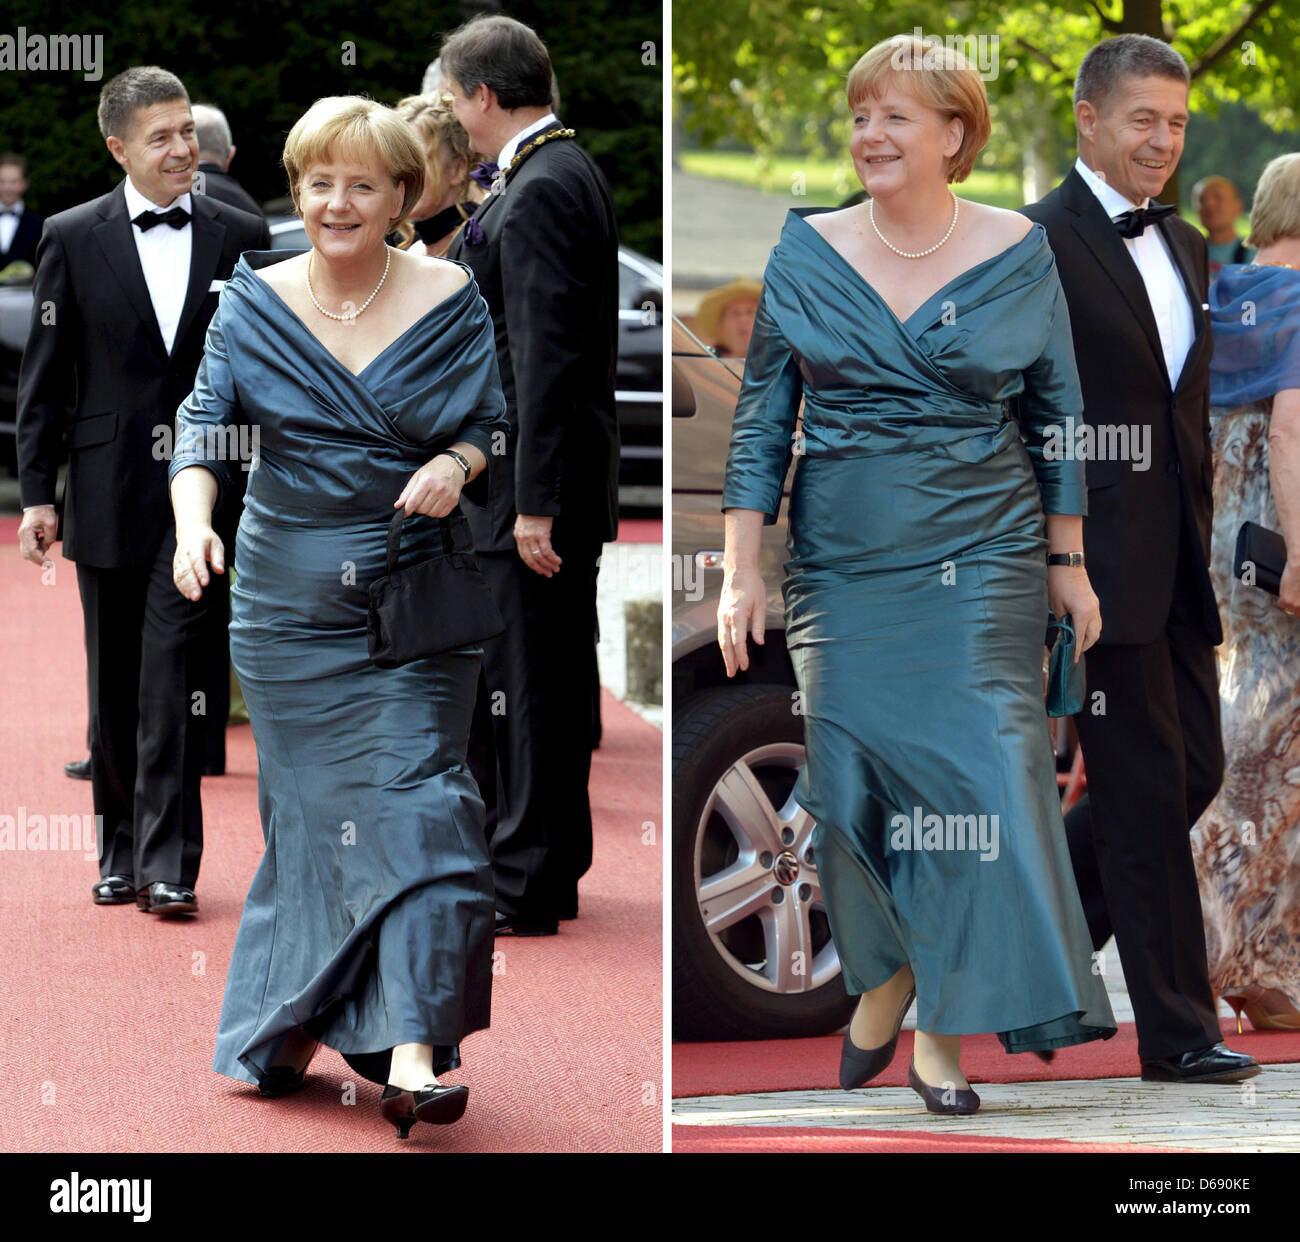 COMBO - A composite image showing German Chancellor Angela Merkel and her  husband Joachim Sauer arrive at the opening of the Bayreuth Festival in  Bayreuth, Germany, 25 July 2008 (left side) and